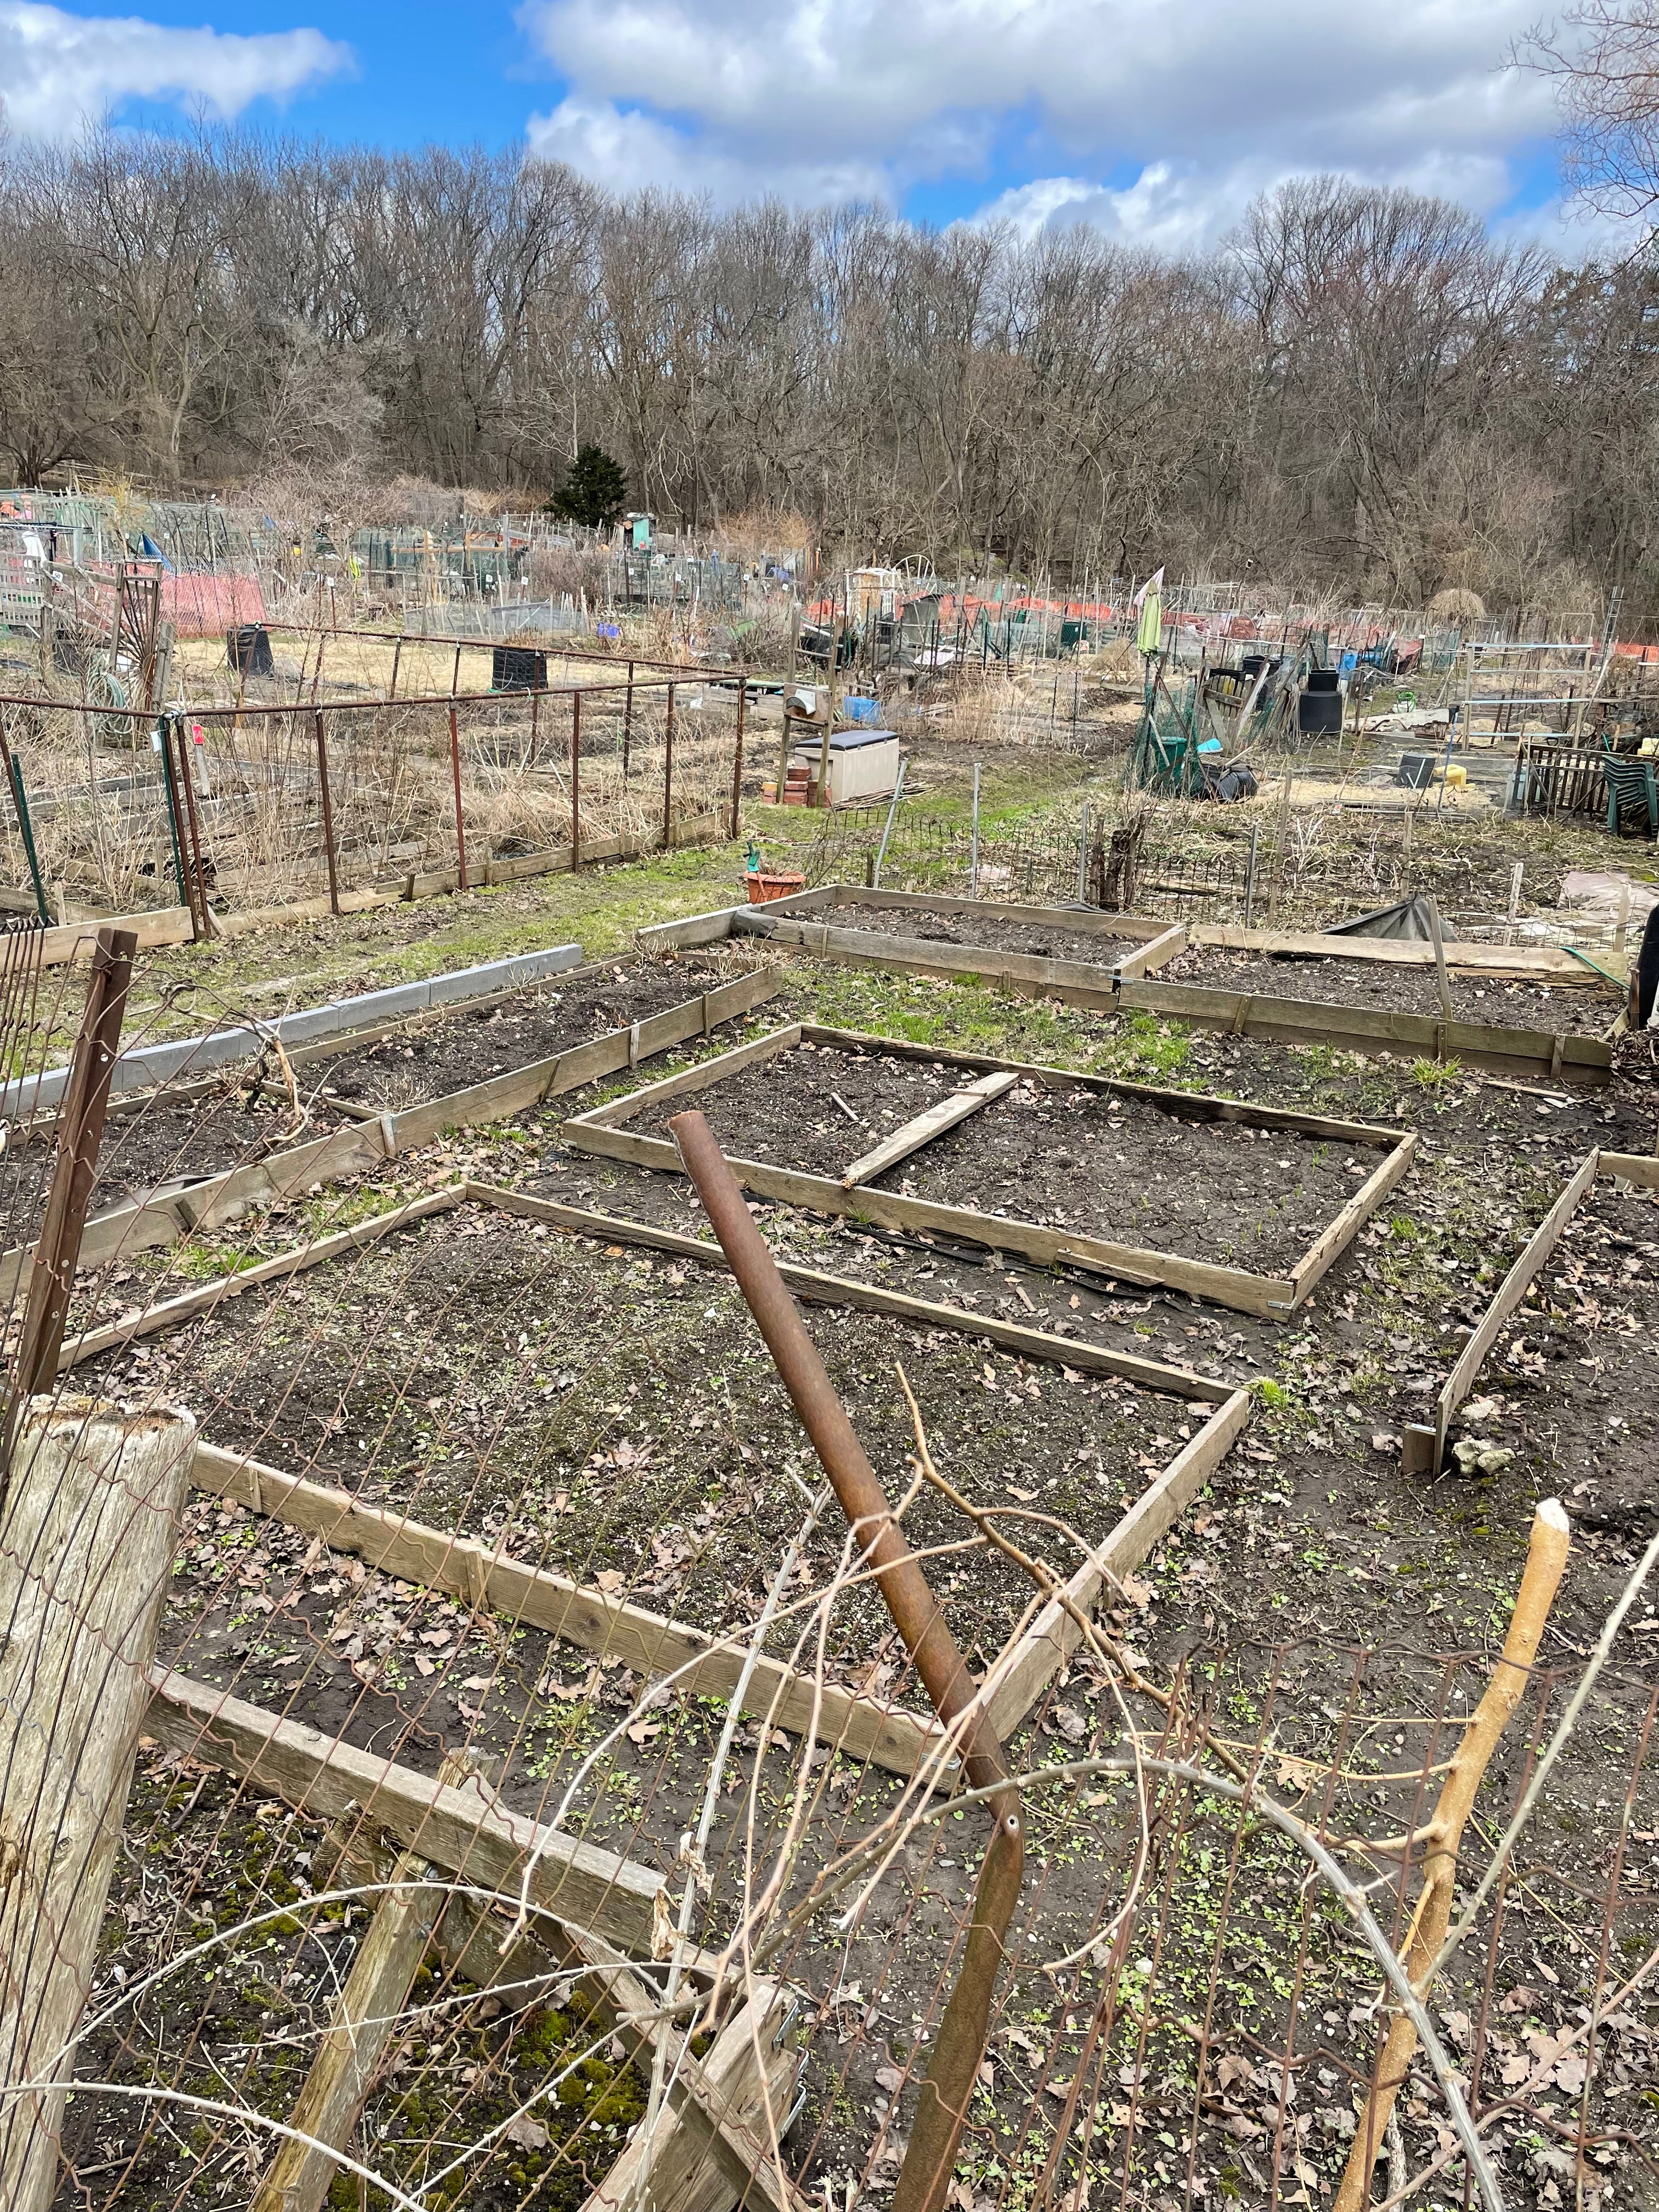 Allotment Gardens, Early Spring